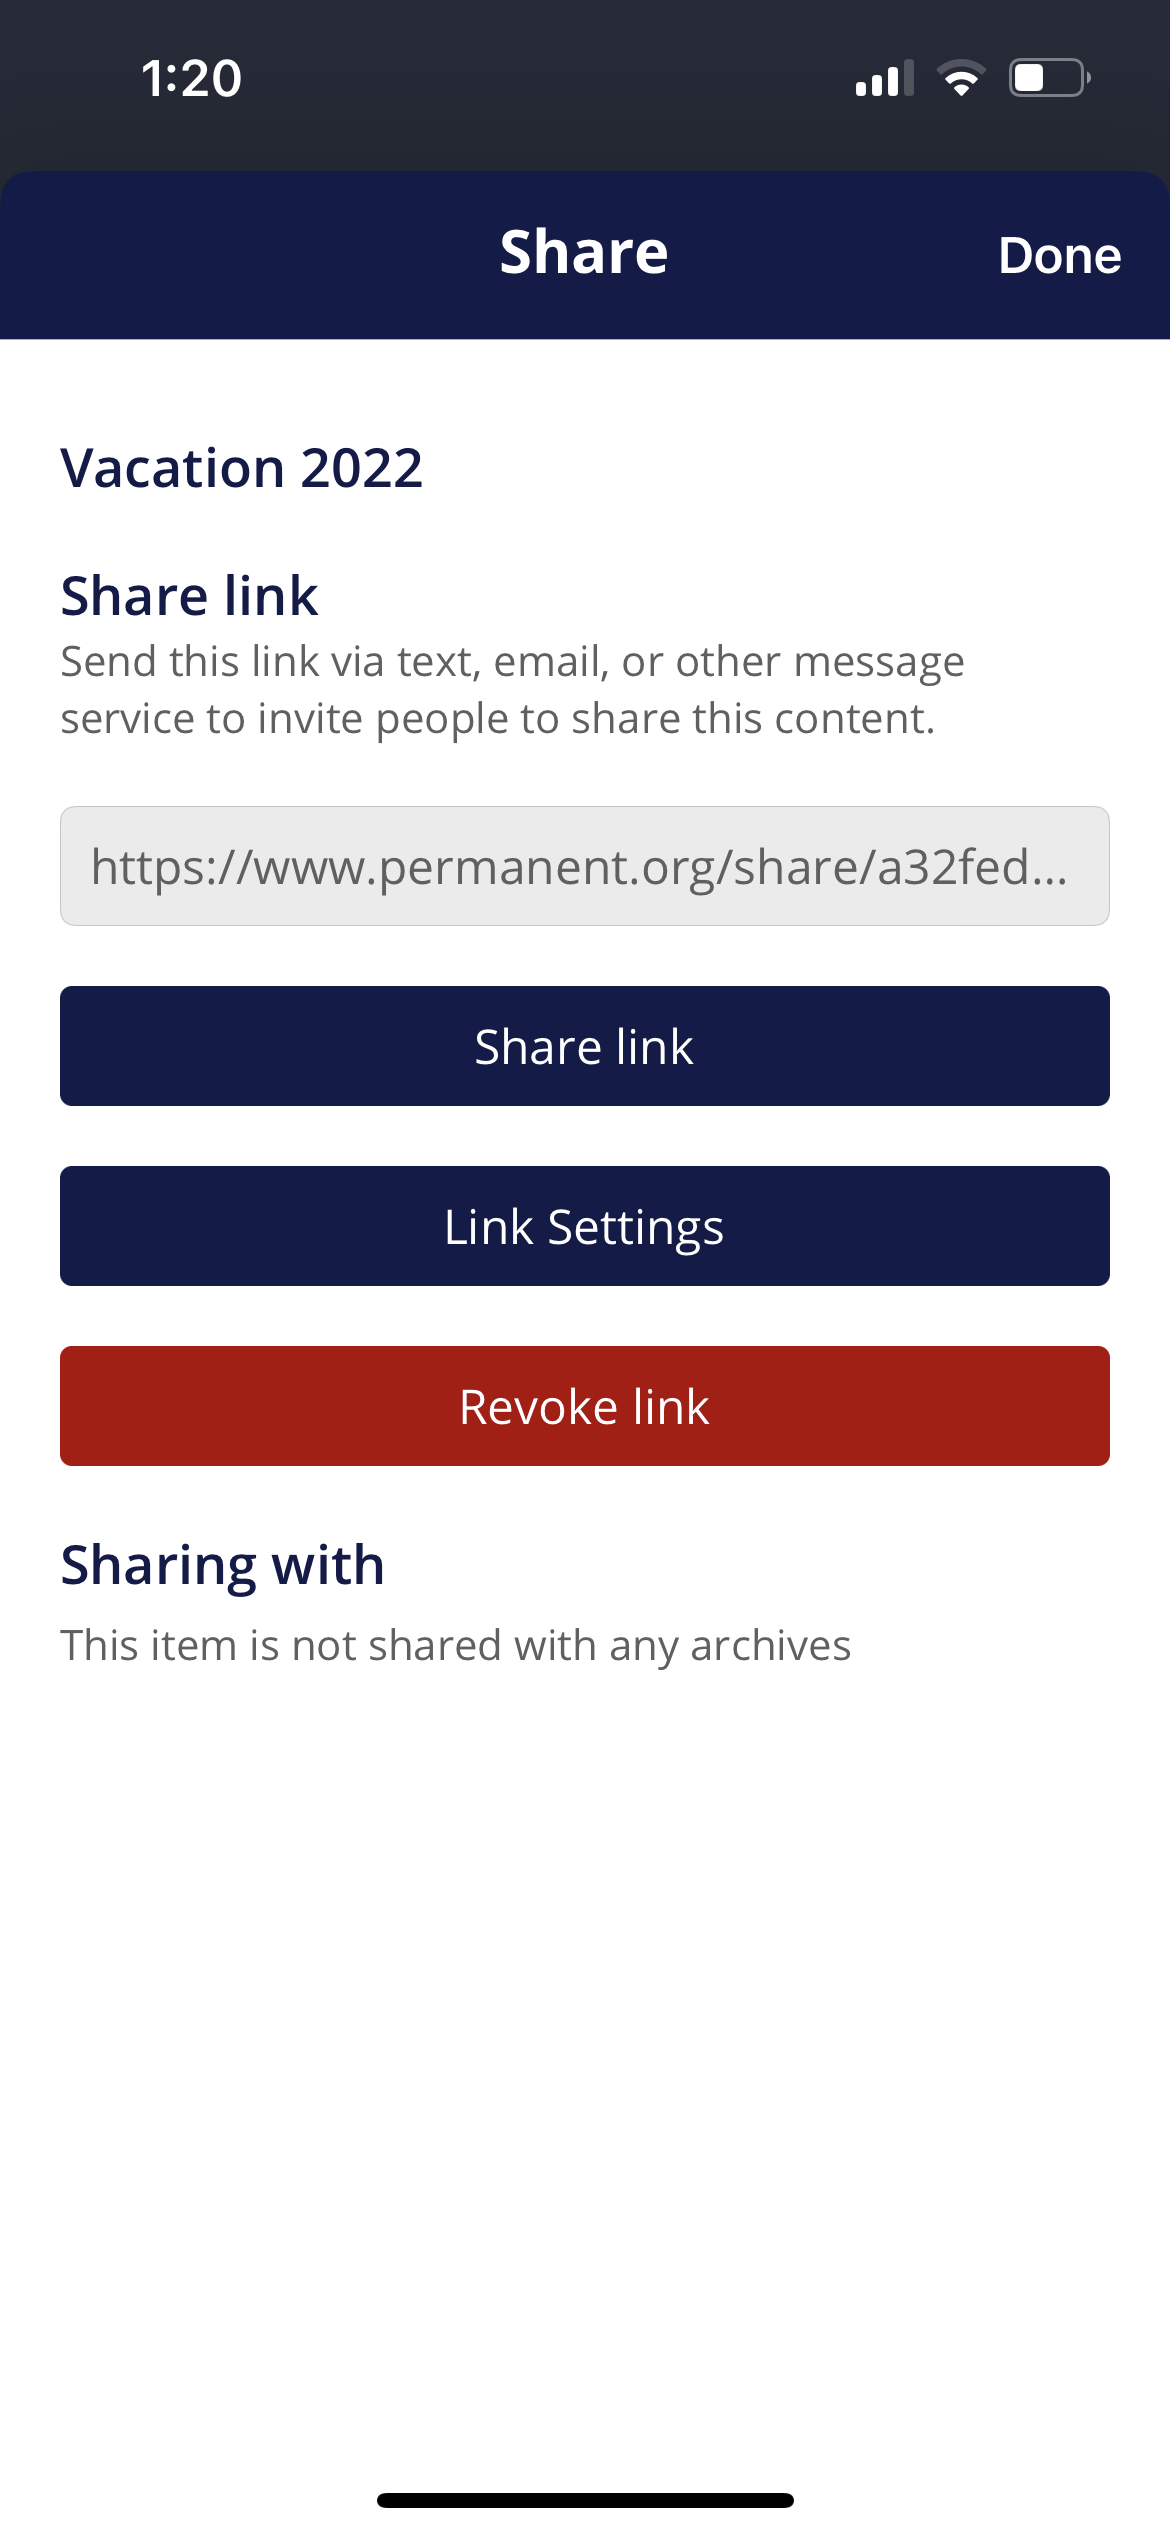 Share links and set preview preferences